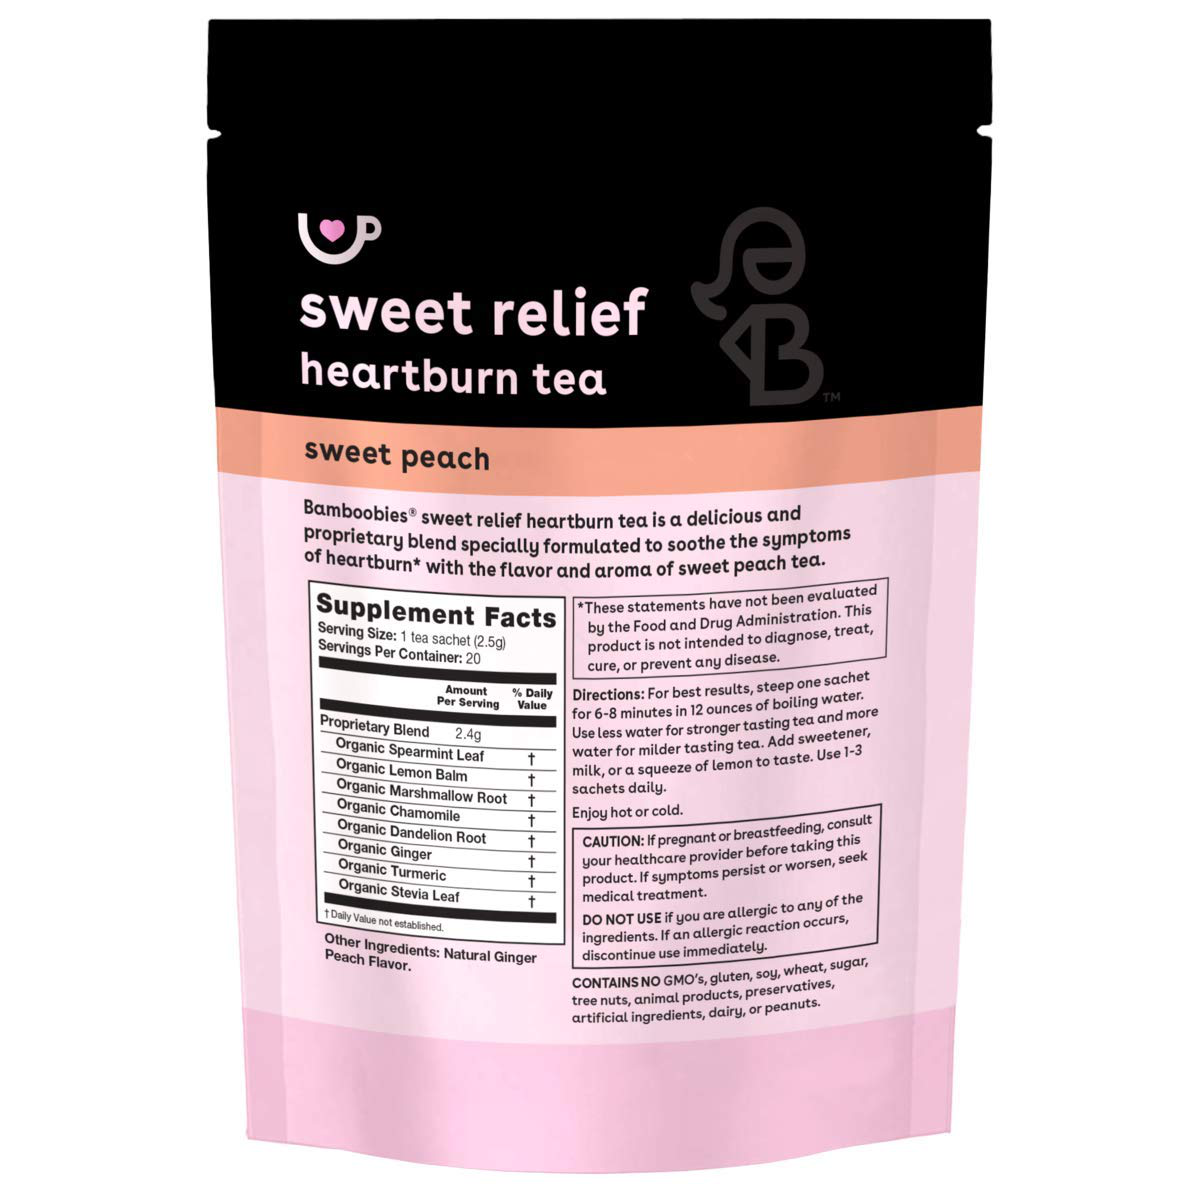 Bamboobies Postpartum Tea | 10 Tea Bags | Black Cherry | Boosts Energy and Promotes Healthy Labor Recovery | Includes Green Tea | Organic, Non GMO, & Sugar Free